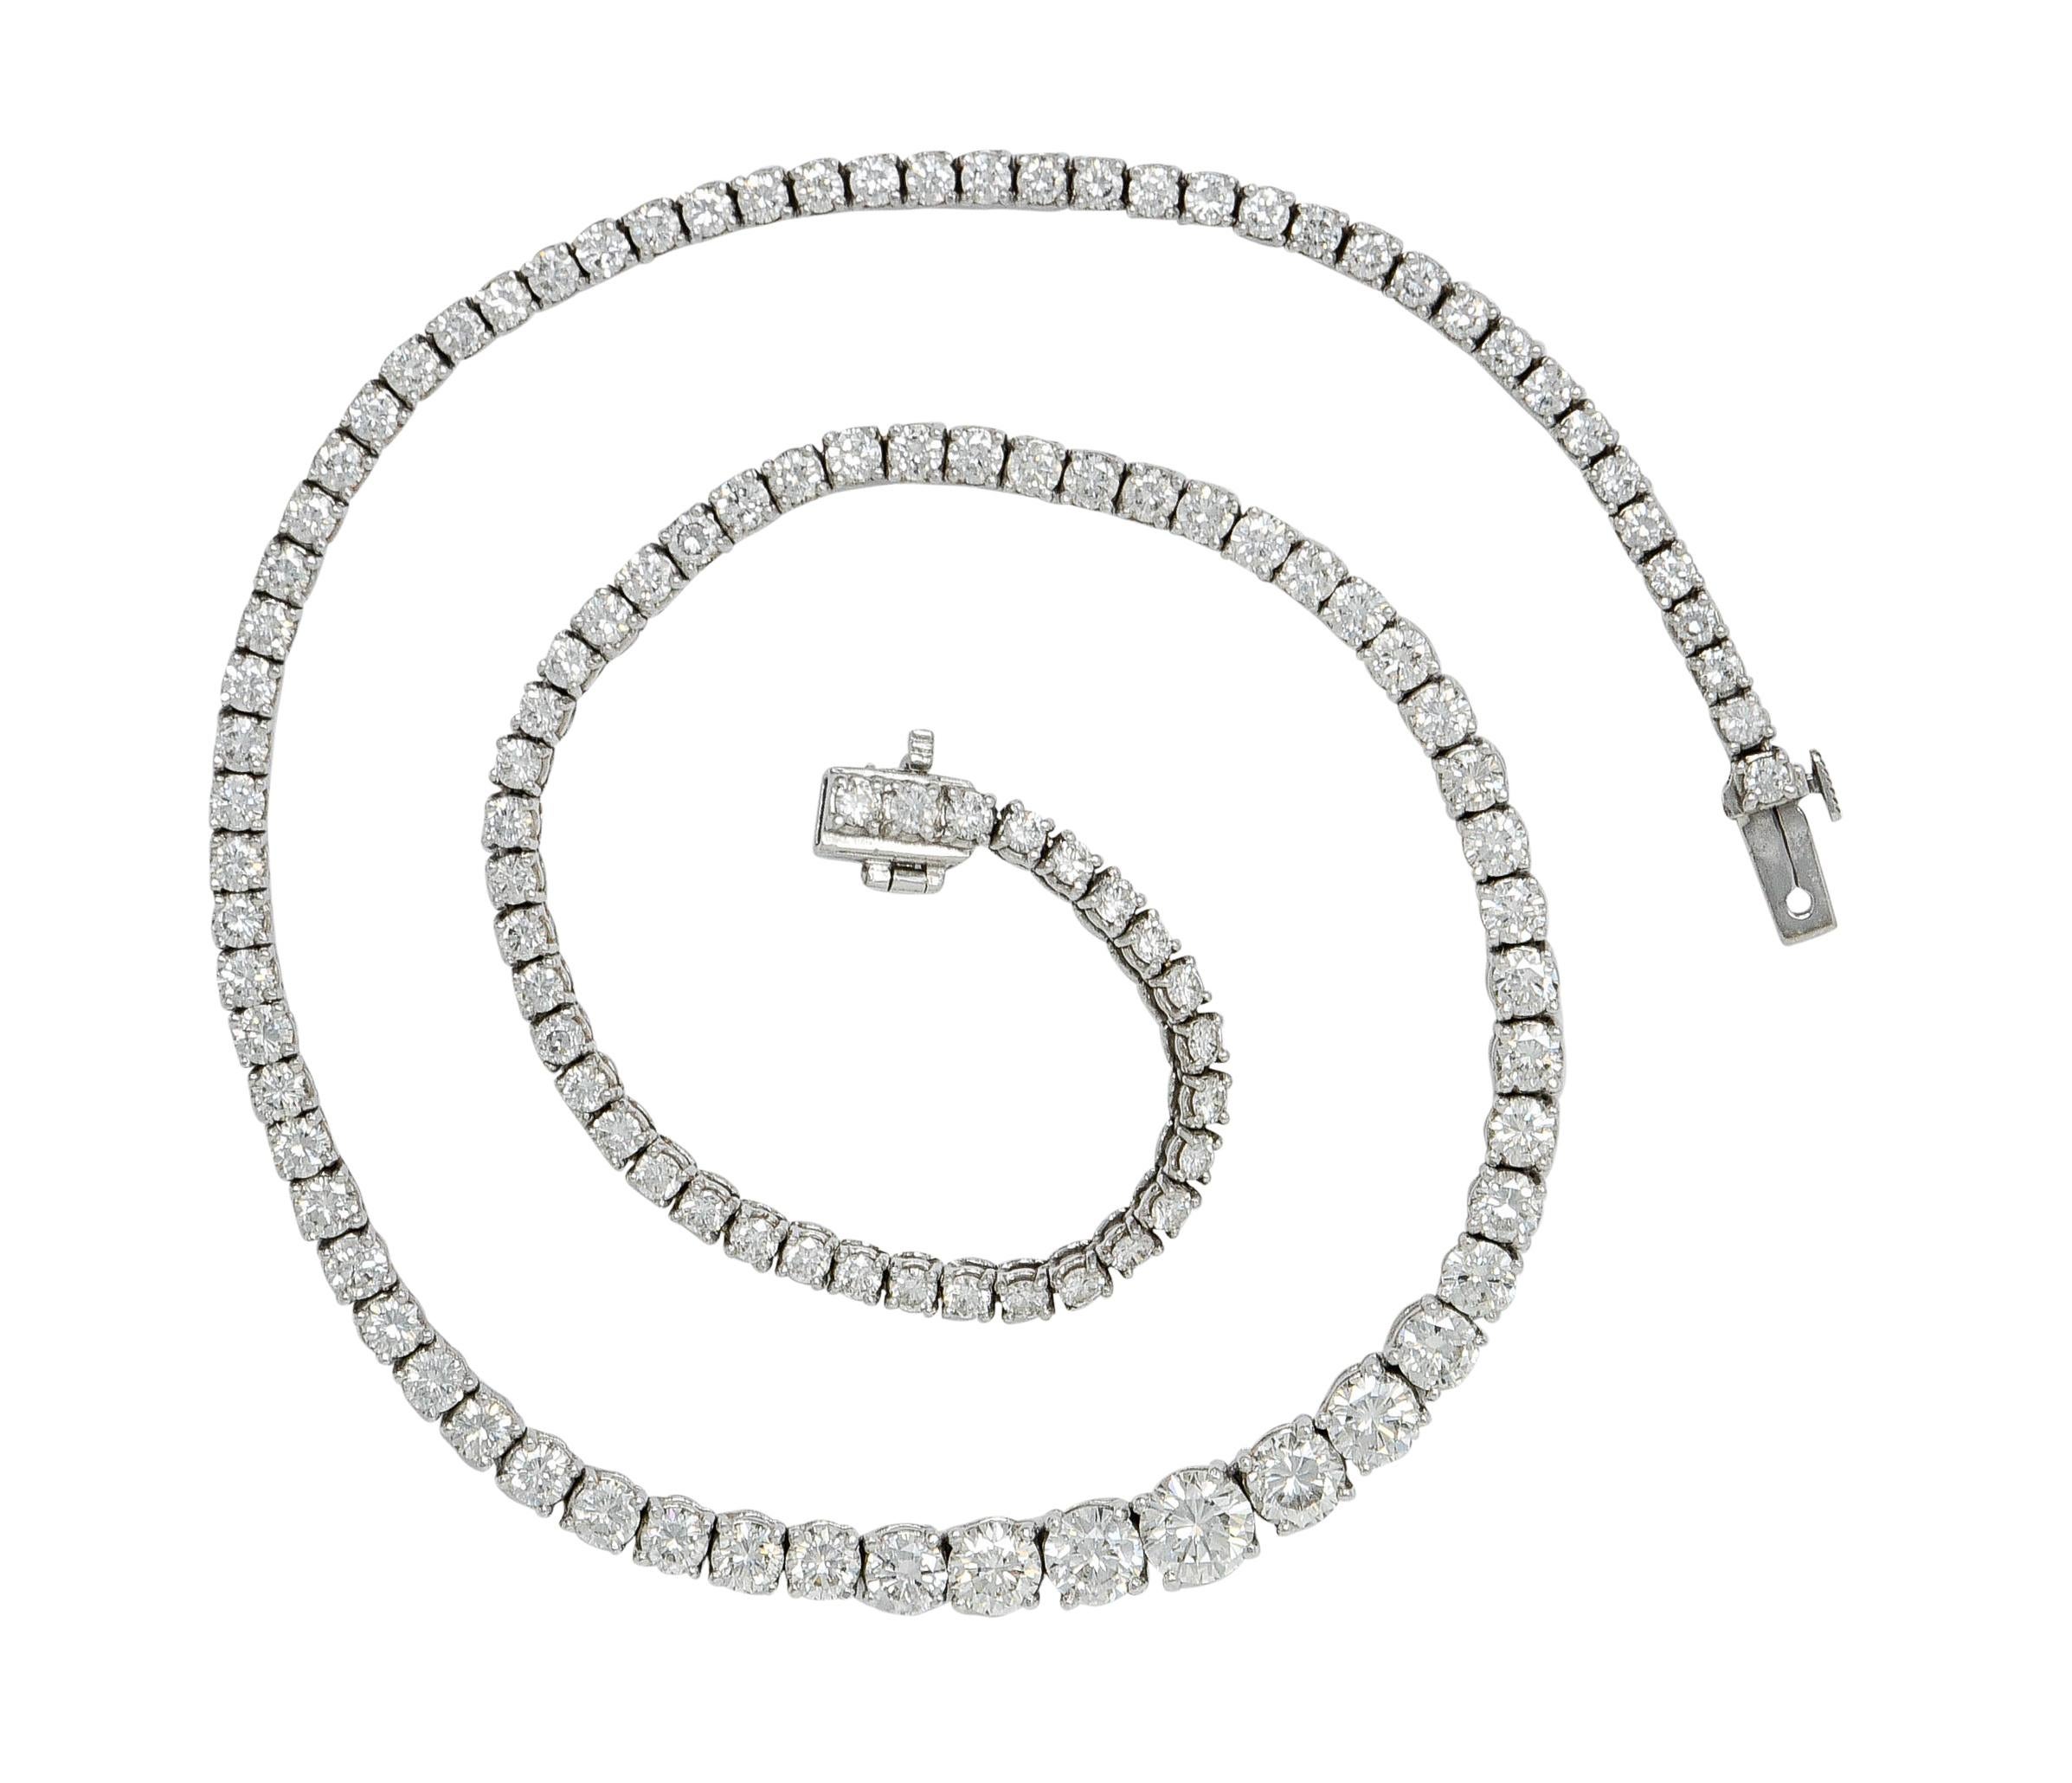 Dazzling riviera style necklace with individual baskets as links

Fully articulated and prong set with round brilliant cut diamonds that graduate in size

Largest central diamonds weighs approximately 0.85 carat; H/I color with VS clarity

Remaining